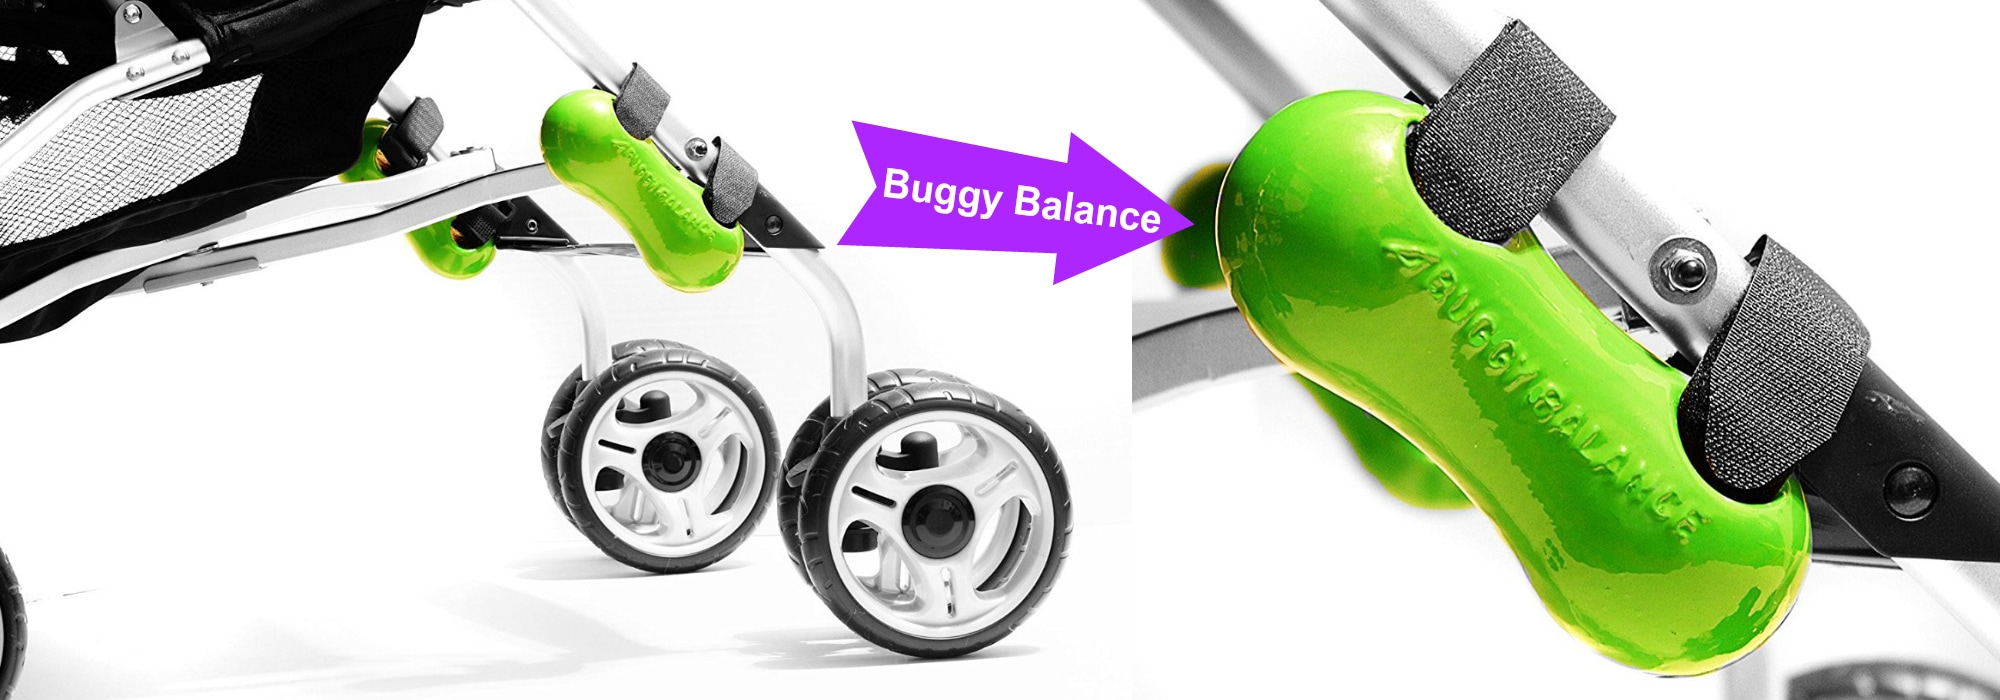 Win a set of Buggy Balance umbrella stroller anti-tip weights in US Japan Fam's $500 value 